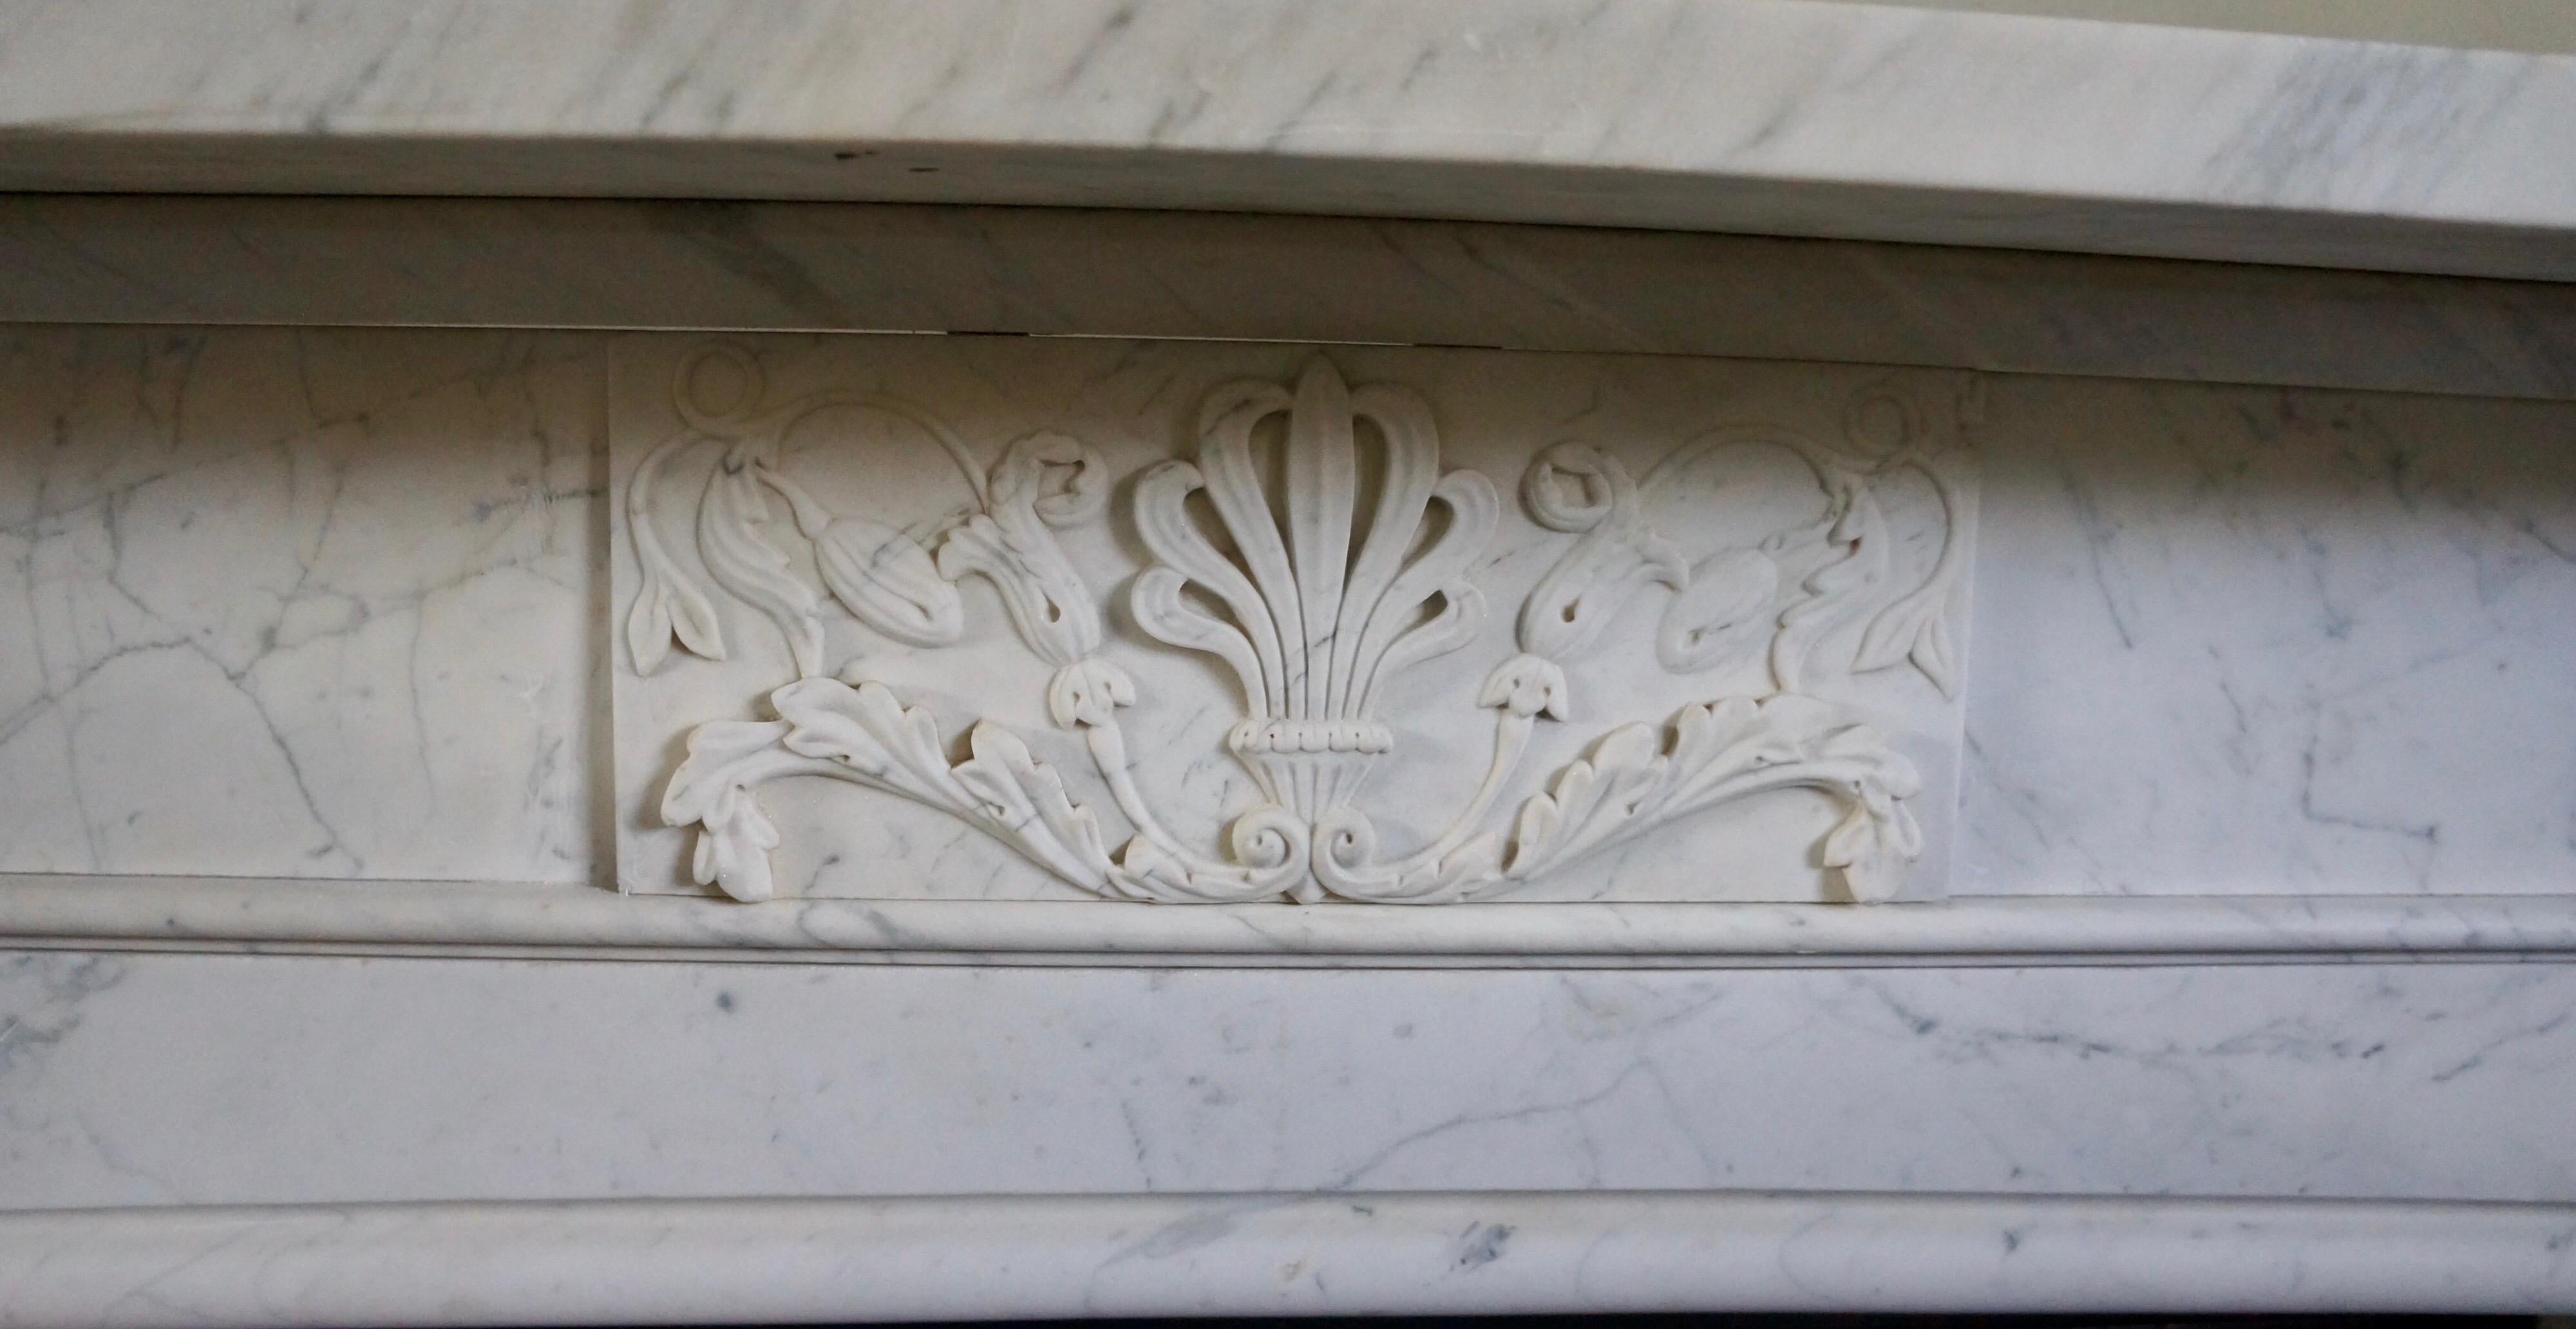 An Imposing and quality Regency period surround in Pencil Vein Carrara Marble. The jambs with tapering fielded panels, surmounted by Anthemion  carved corner blocks. The moulded ingrounds supporting a lightly arched opening. The frieze with centre